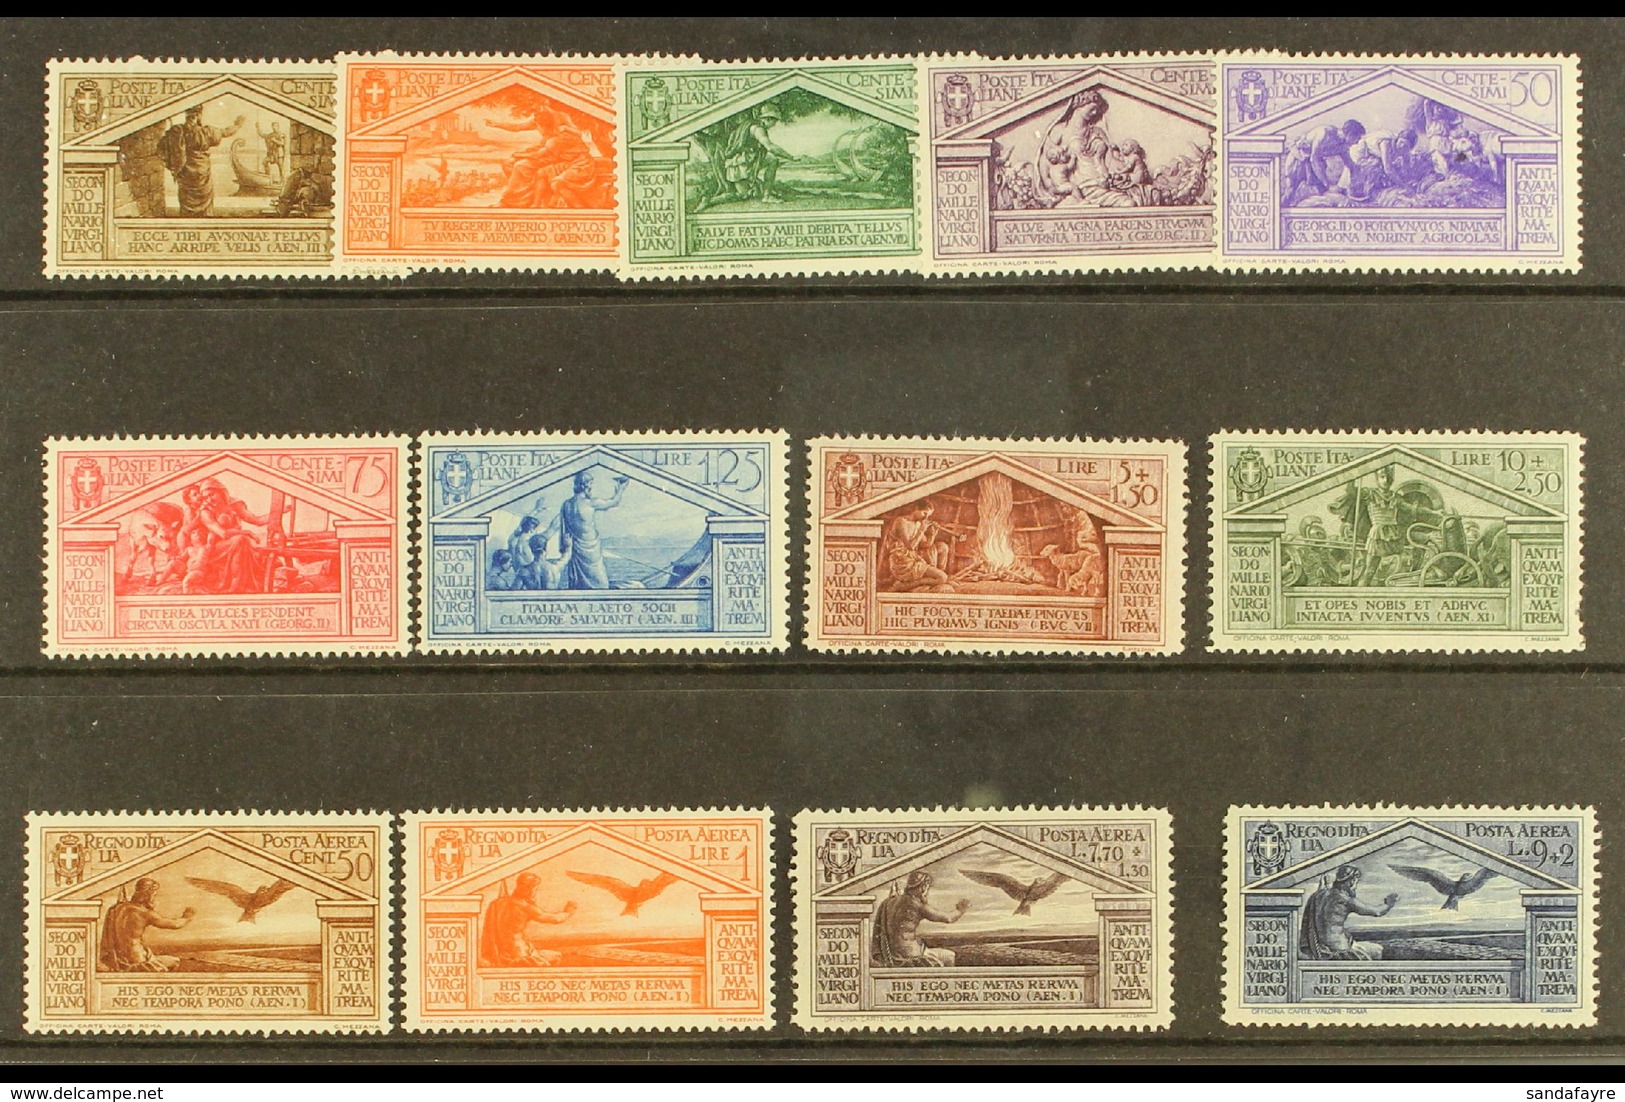 1930 Virgil  Postage And Air Sets Complete, Sass S. 58, Fresh Mint, The 10L Postage With Perf Fault, All Others Very Fin - Non Classificati